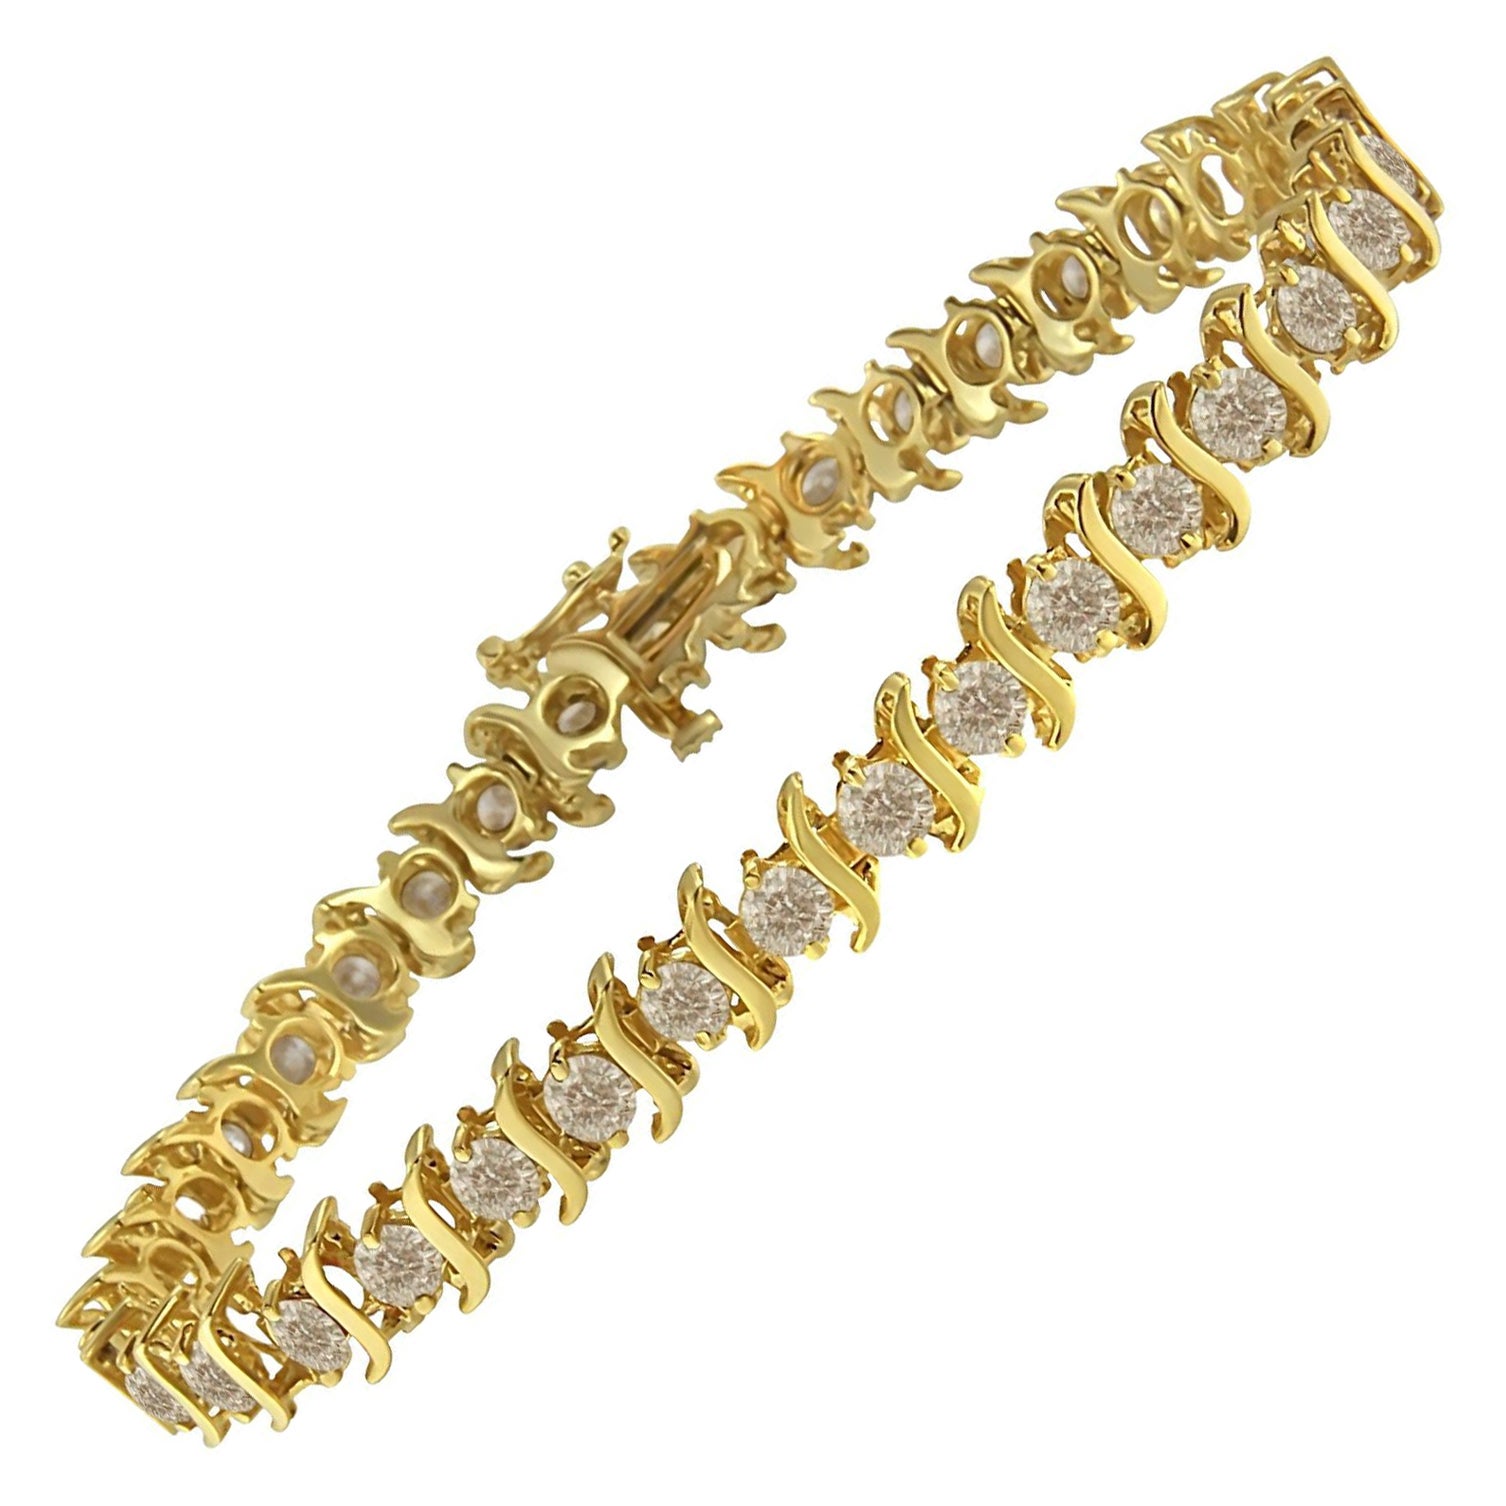 Yellow Gold-Plated Sterling Silver 6.0 Carat Round-Cut Diamond "S" Link Bracelet For Sale